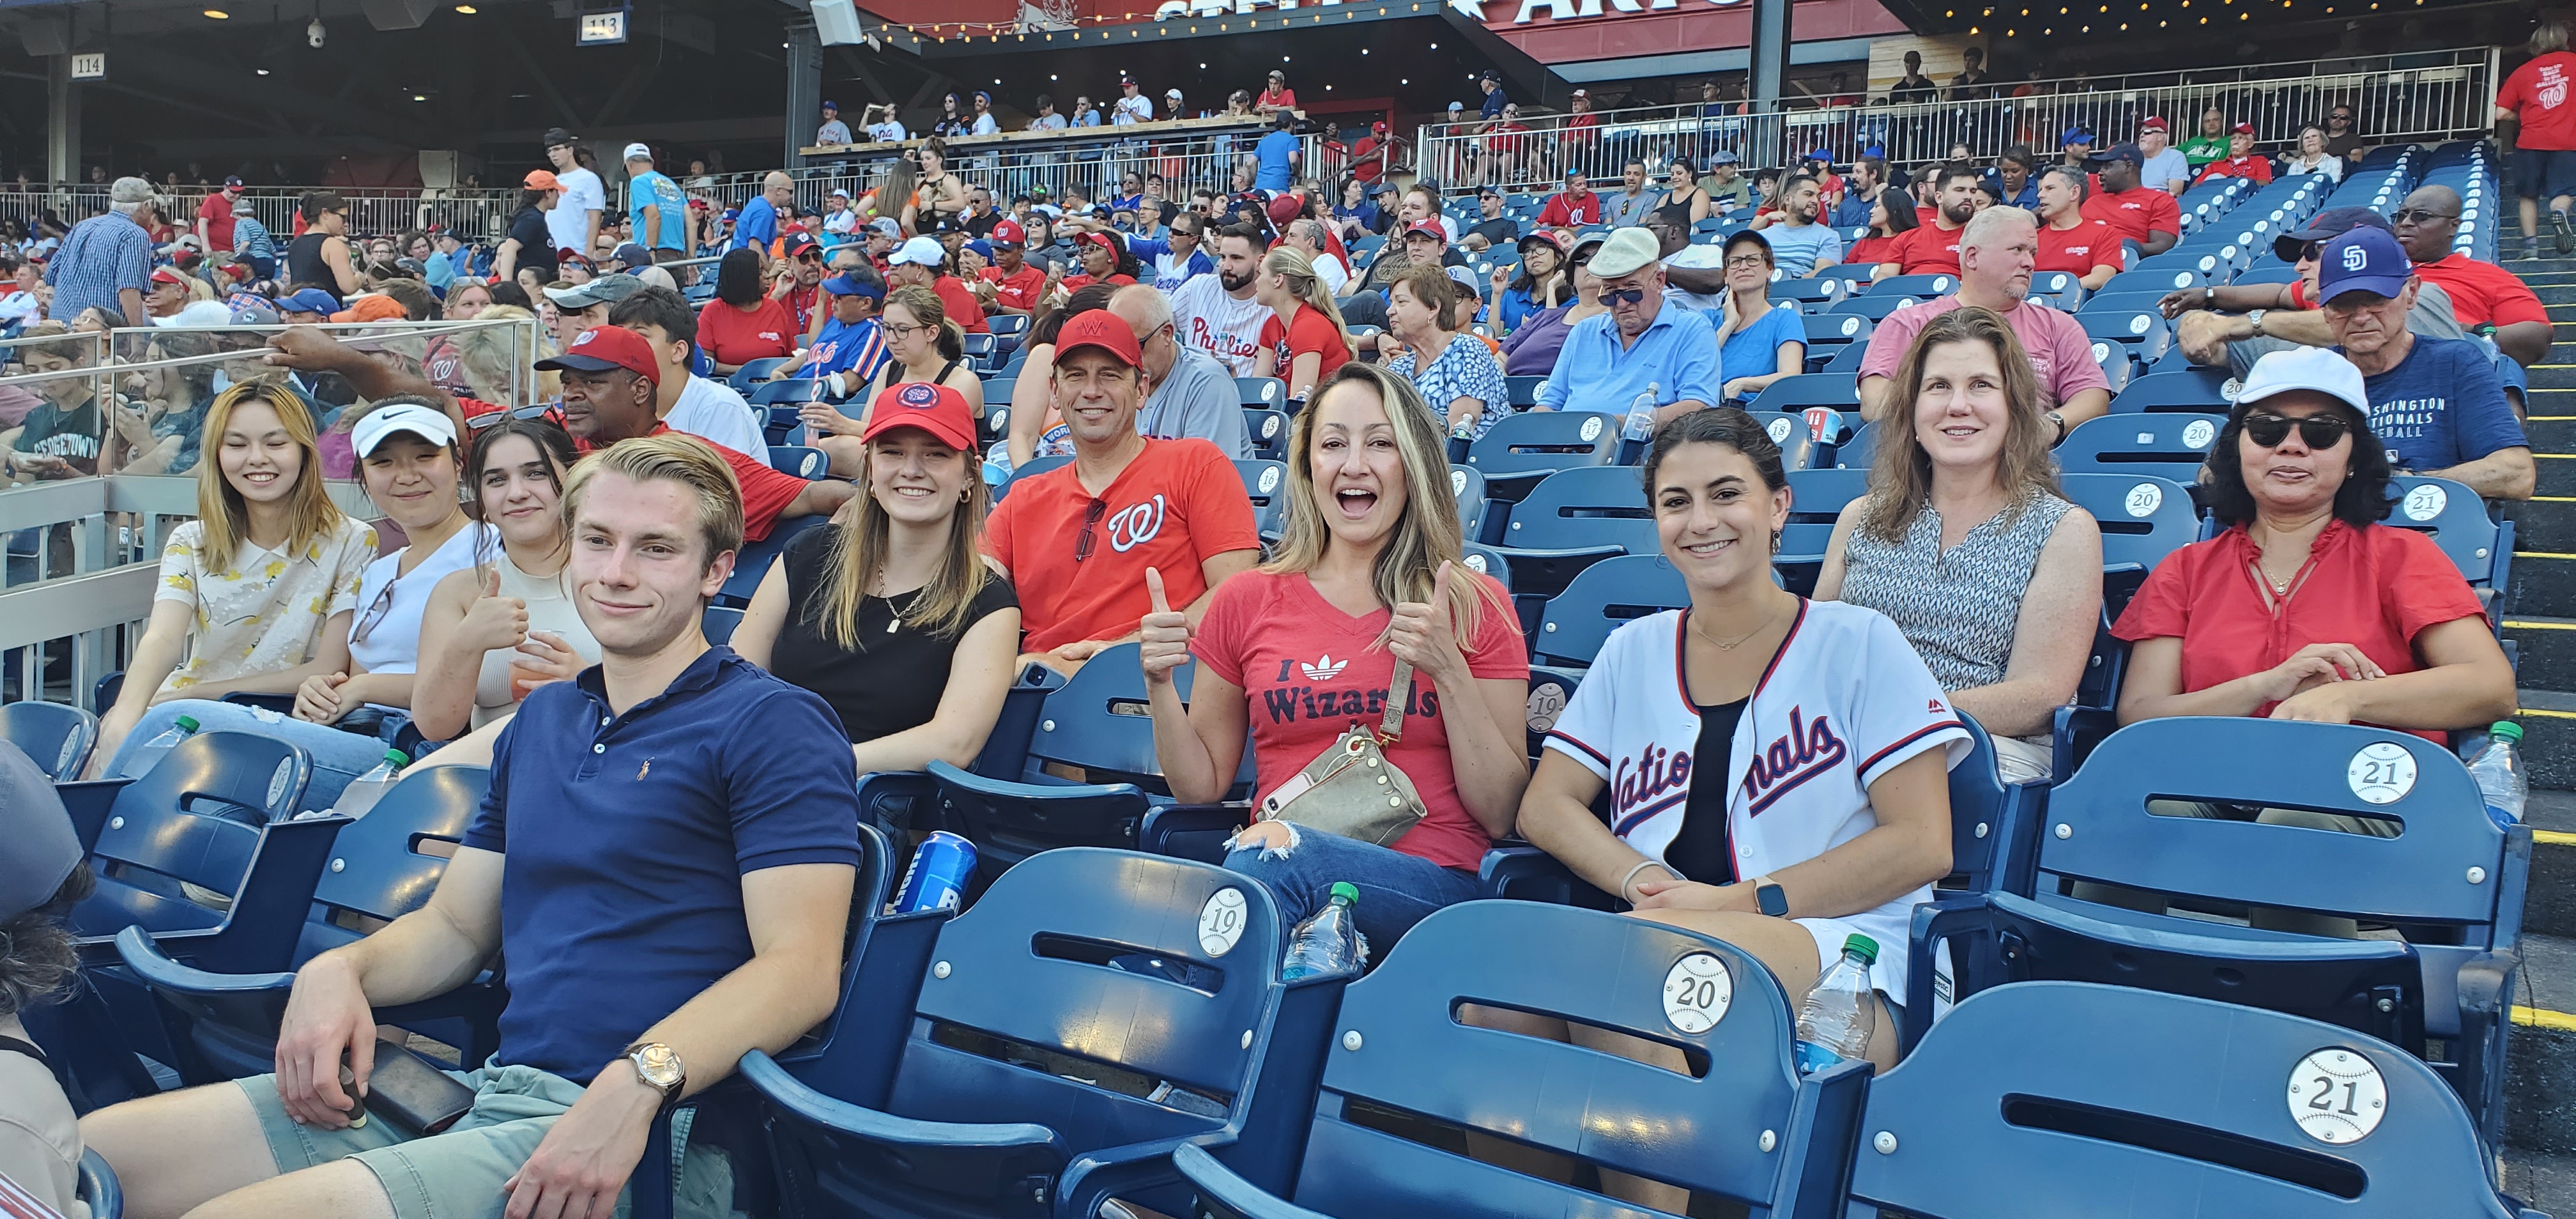 Interns go to Nats game